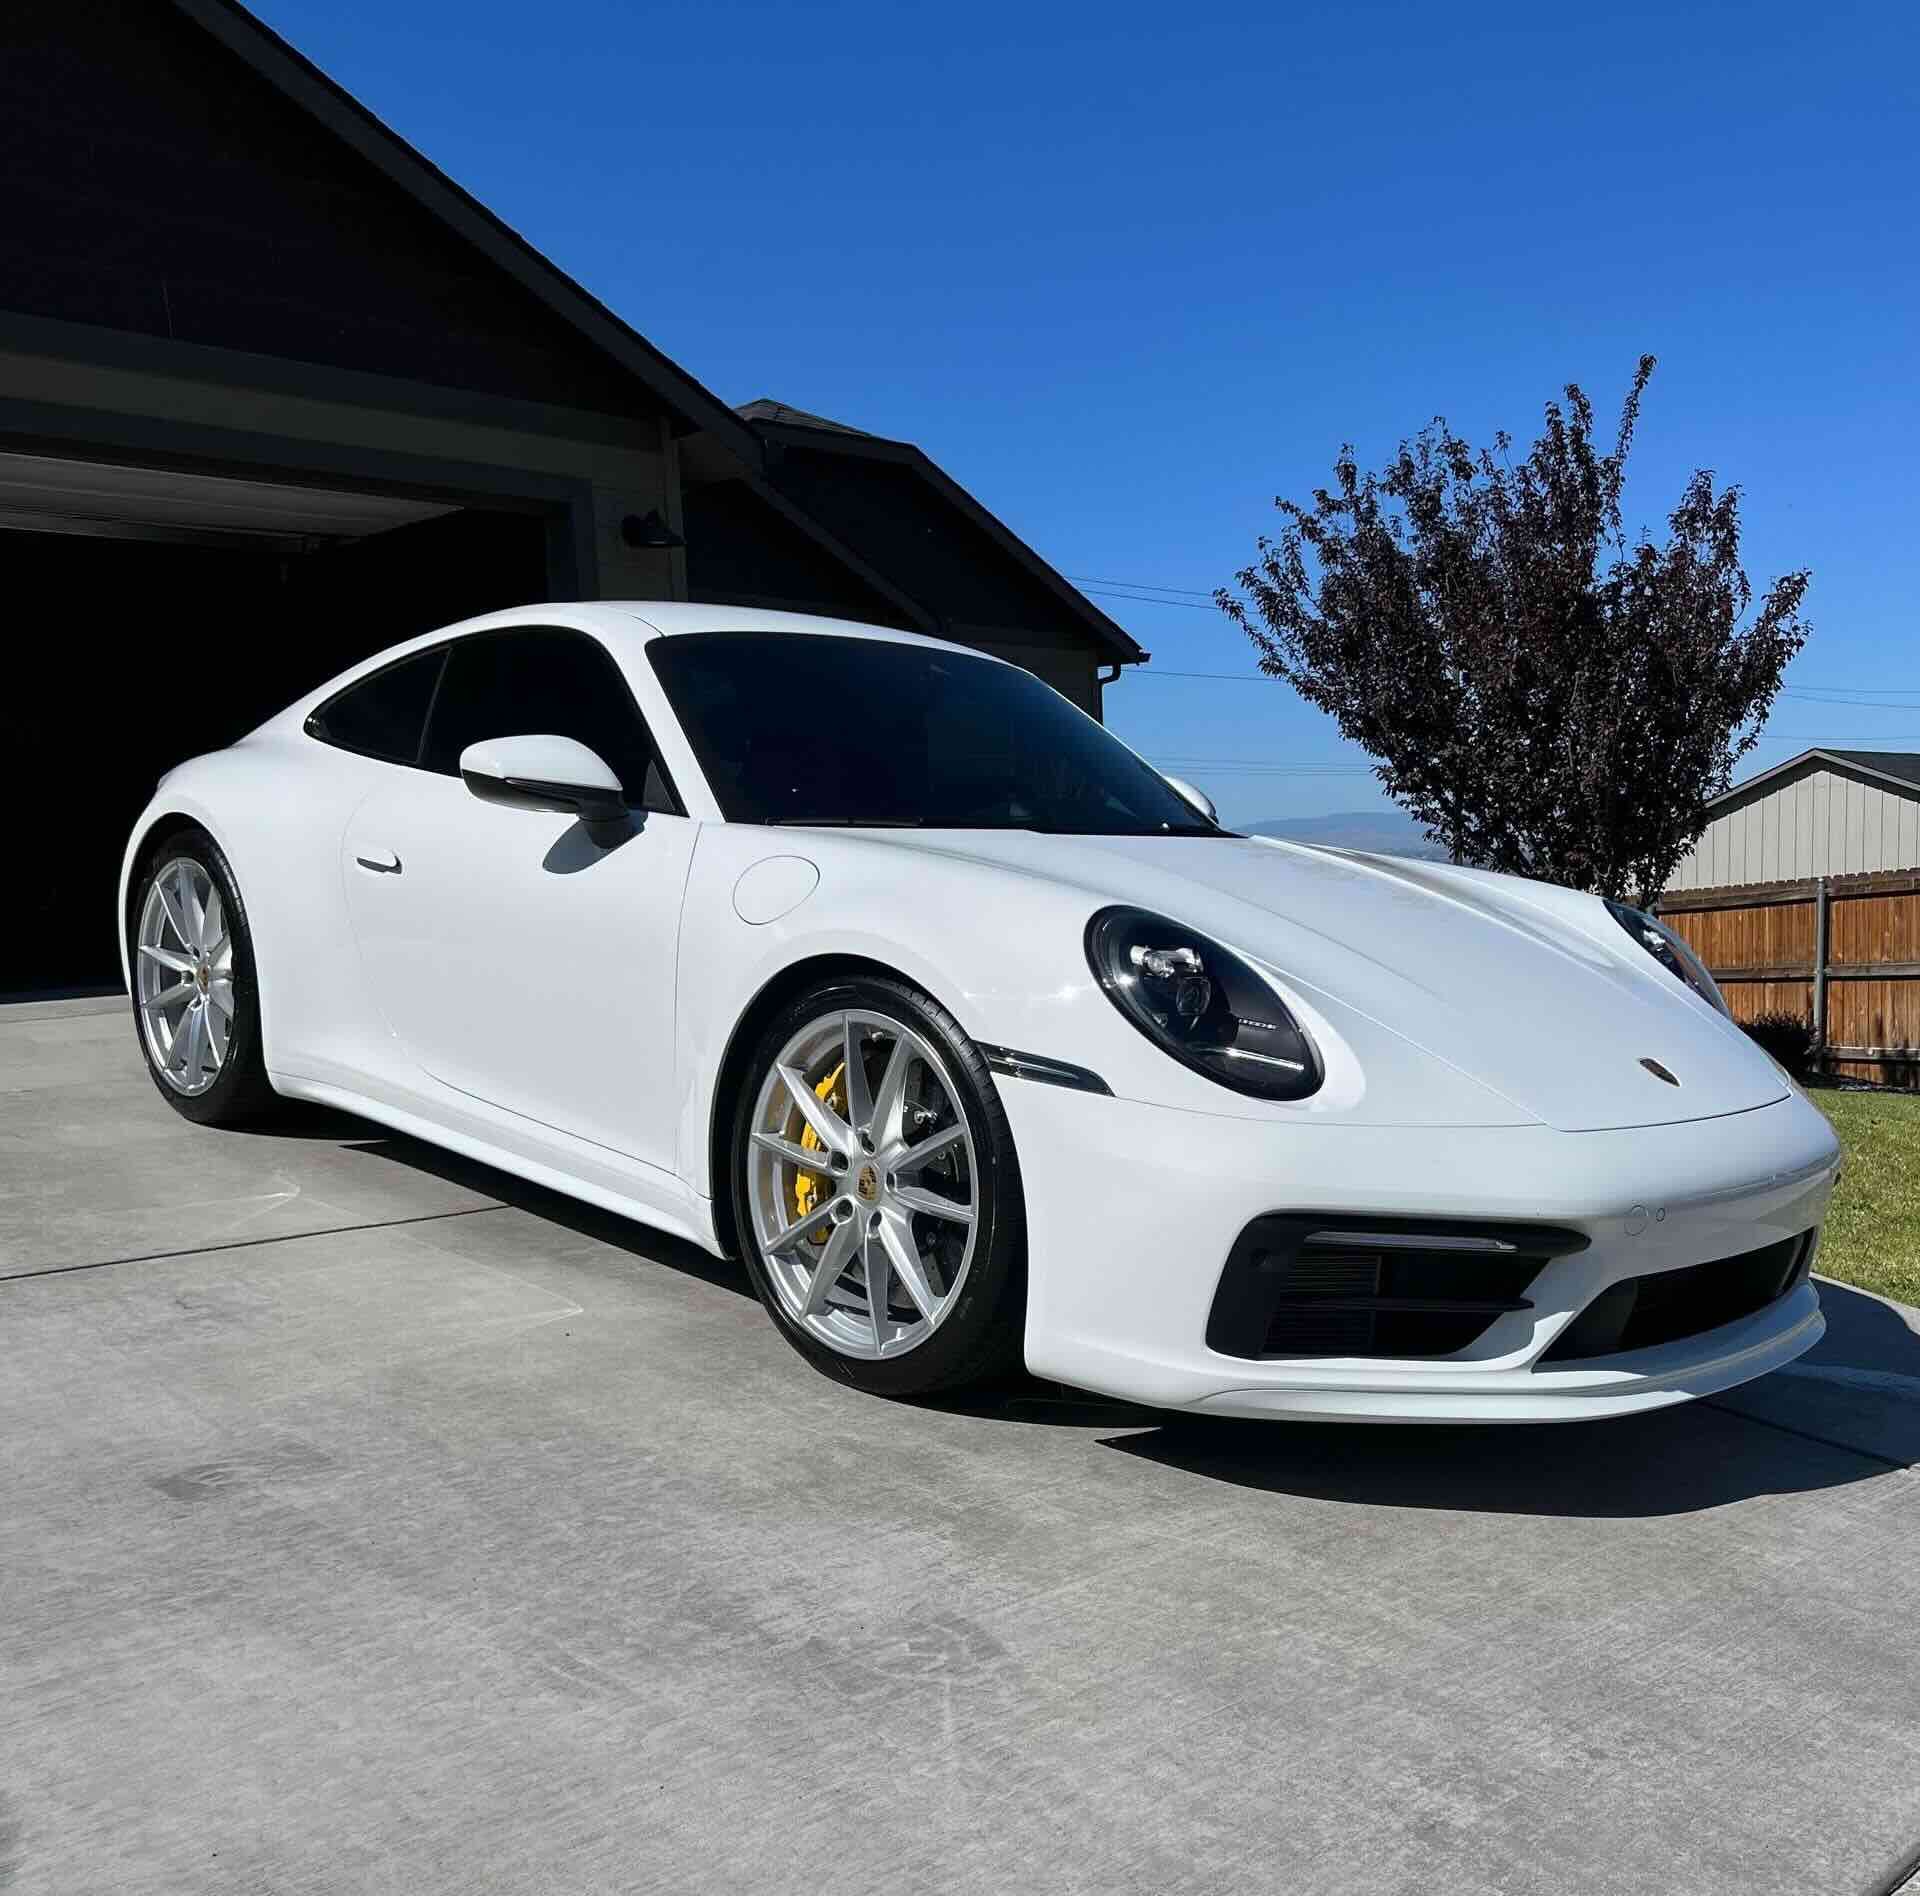 a white porsche 911 is parked in front of a house